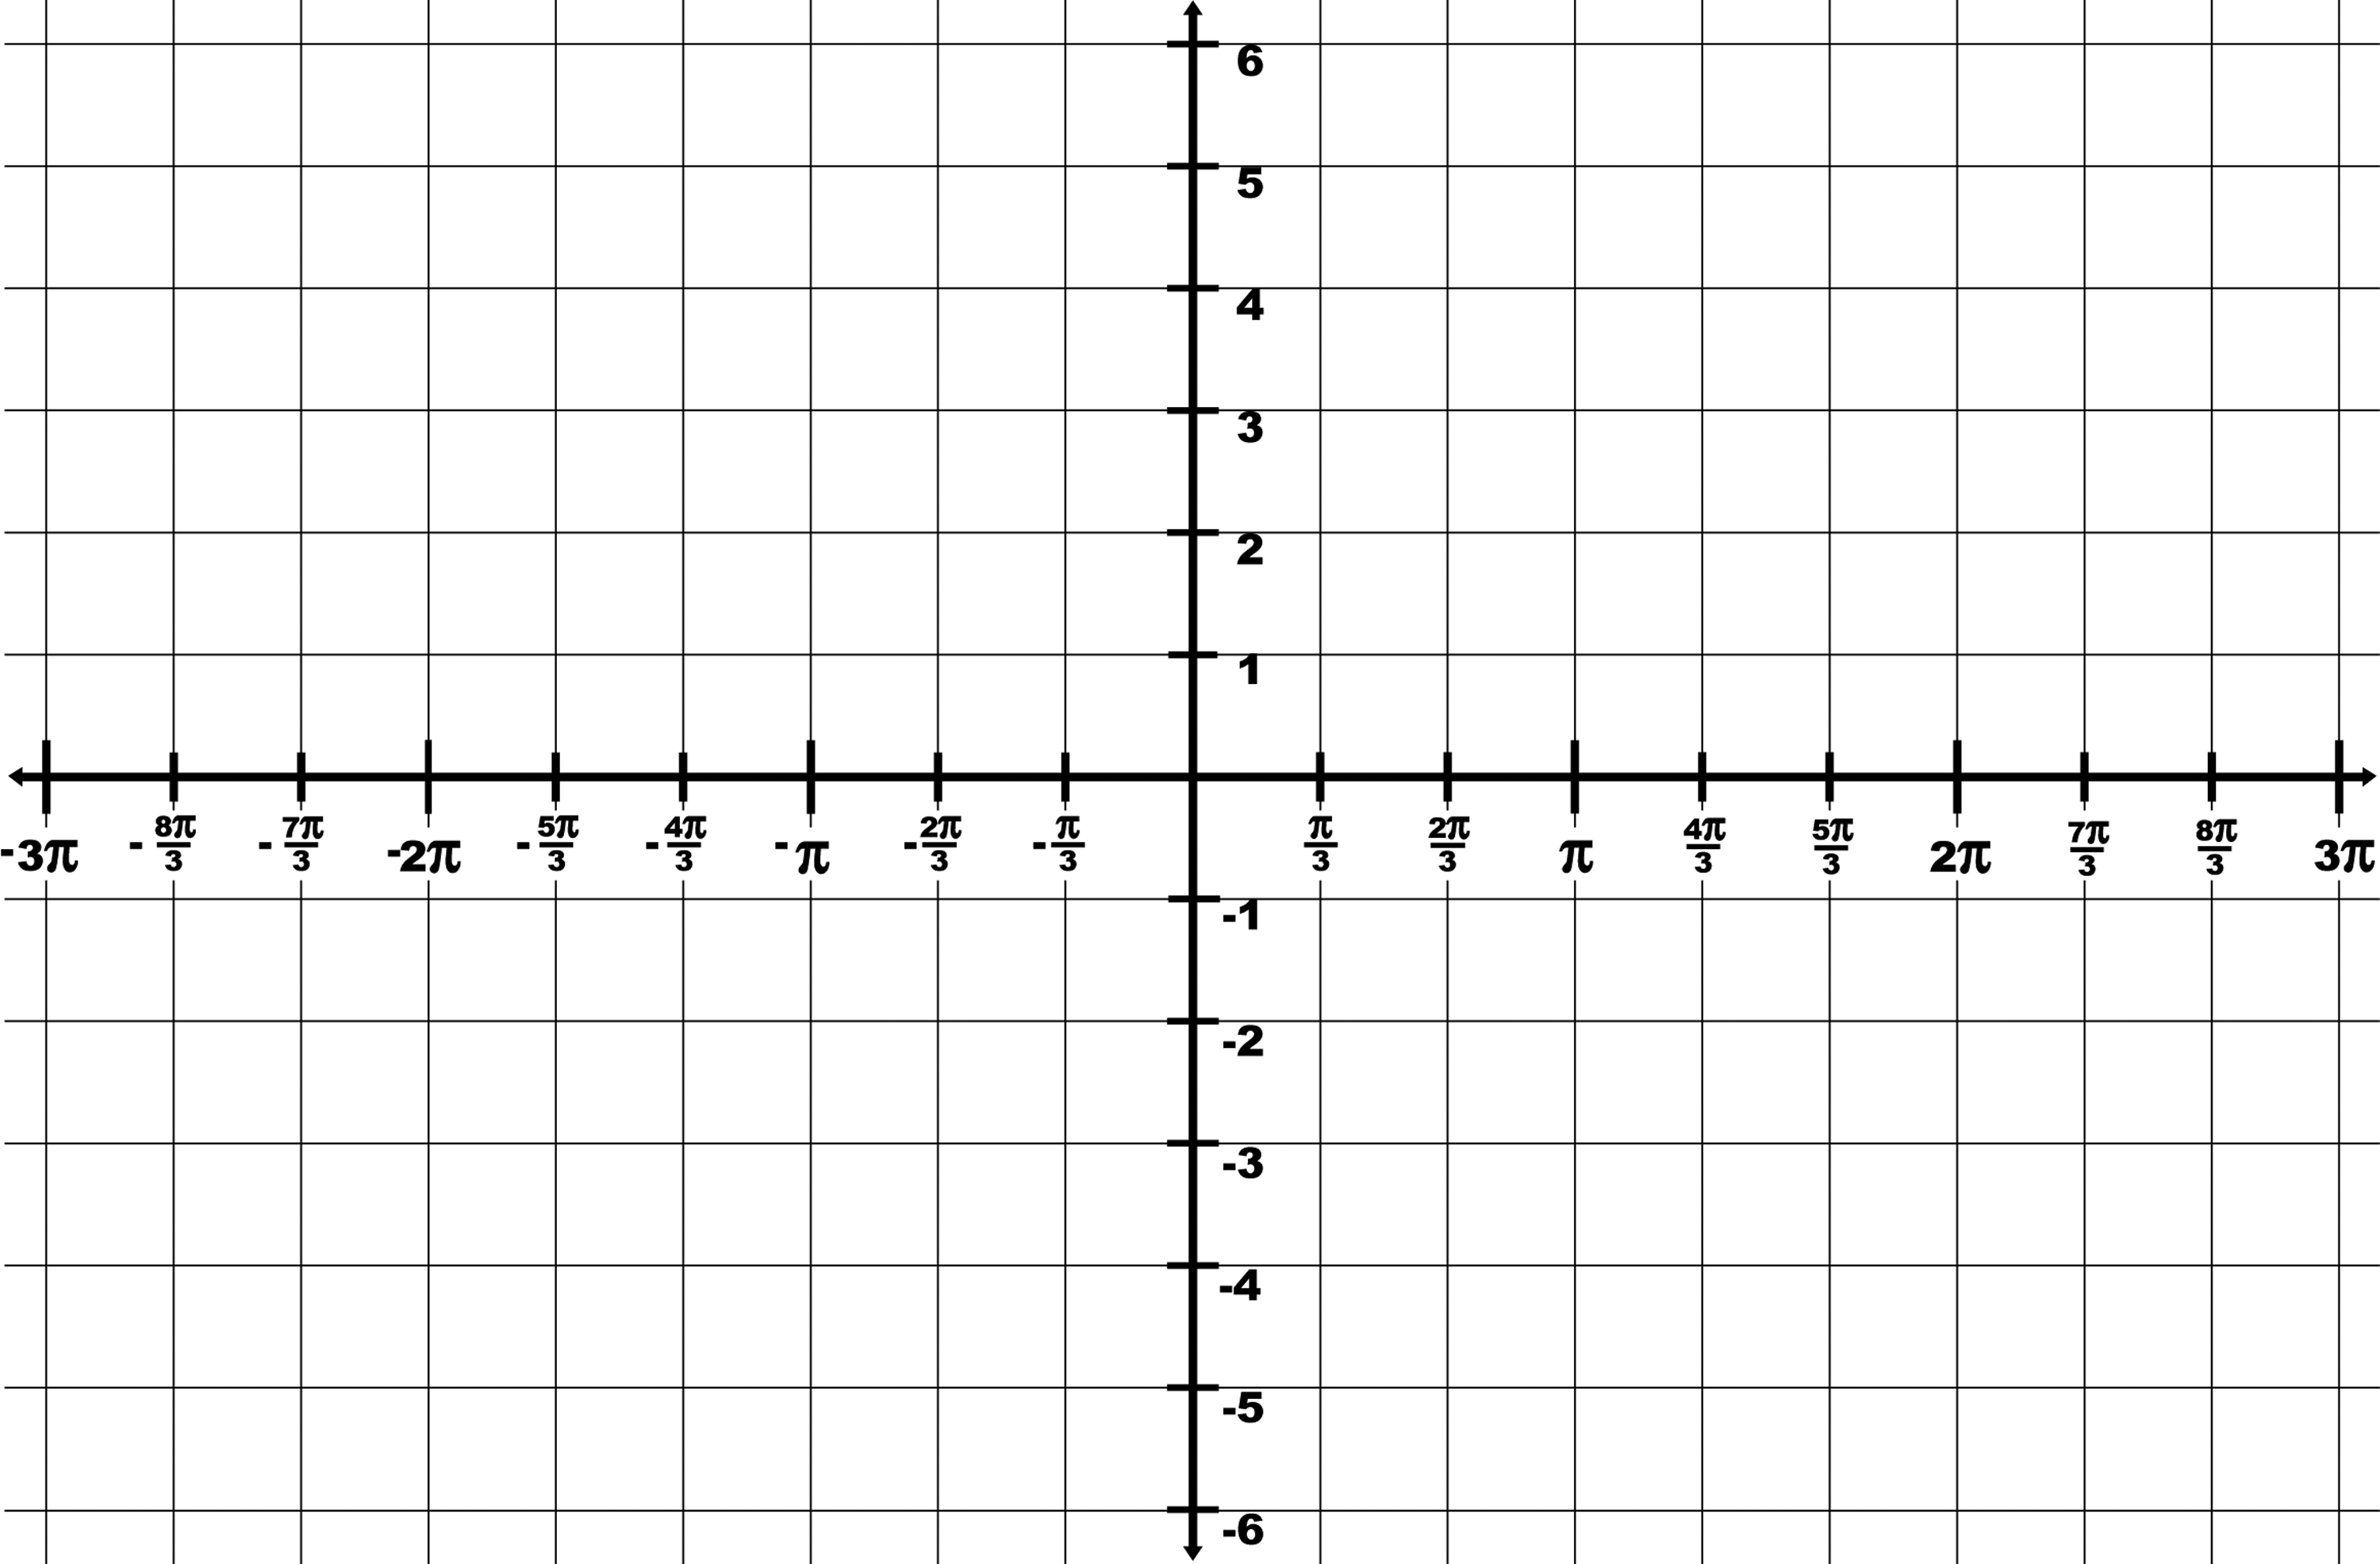 trigonometry-grid-with-domain-3-to-3-and-range-6-to-6-clipart-etc